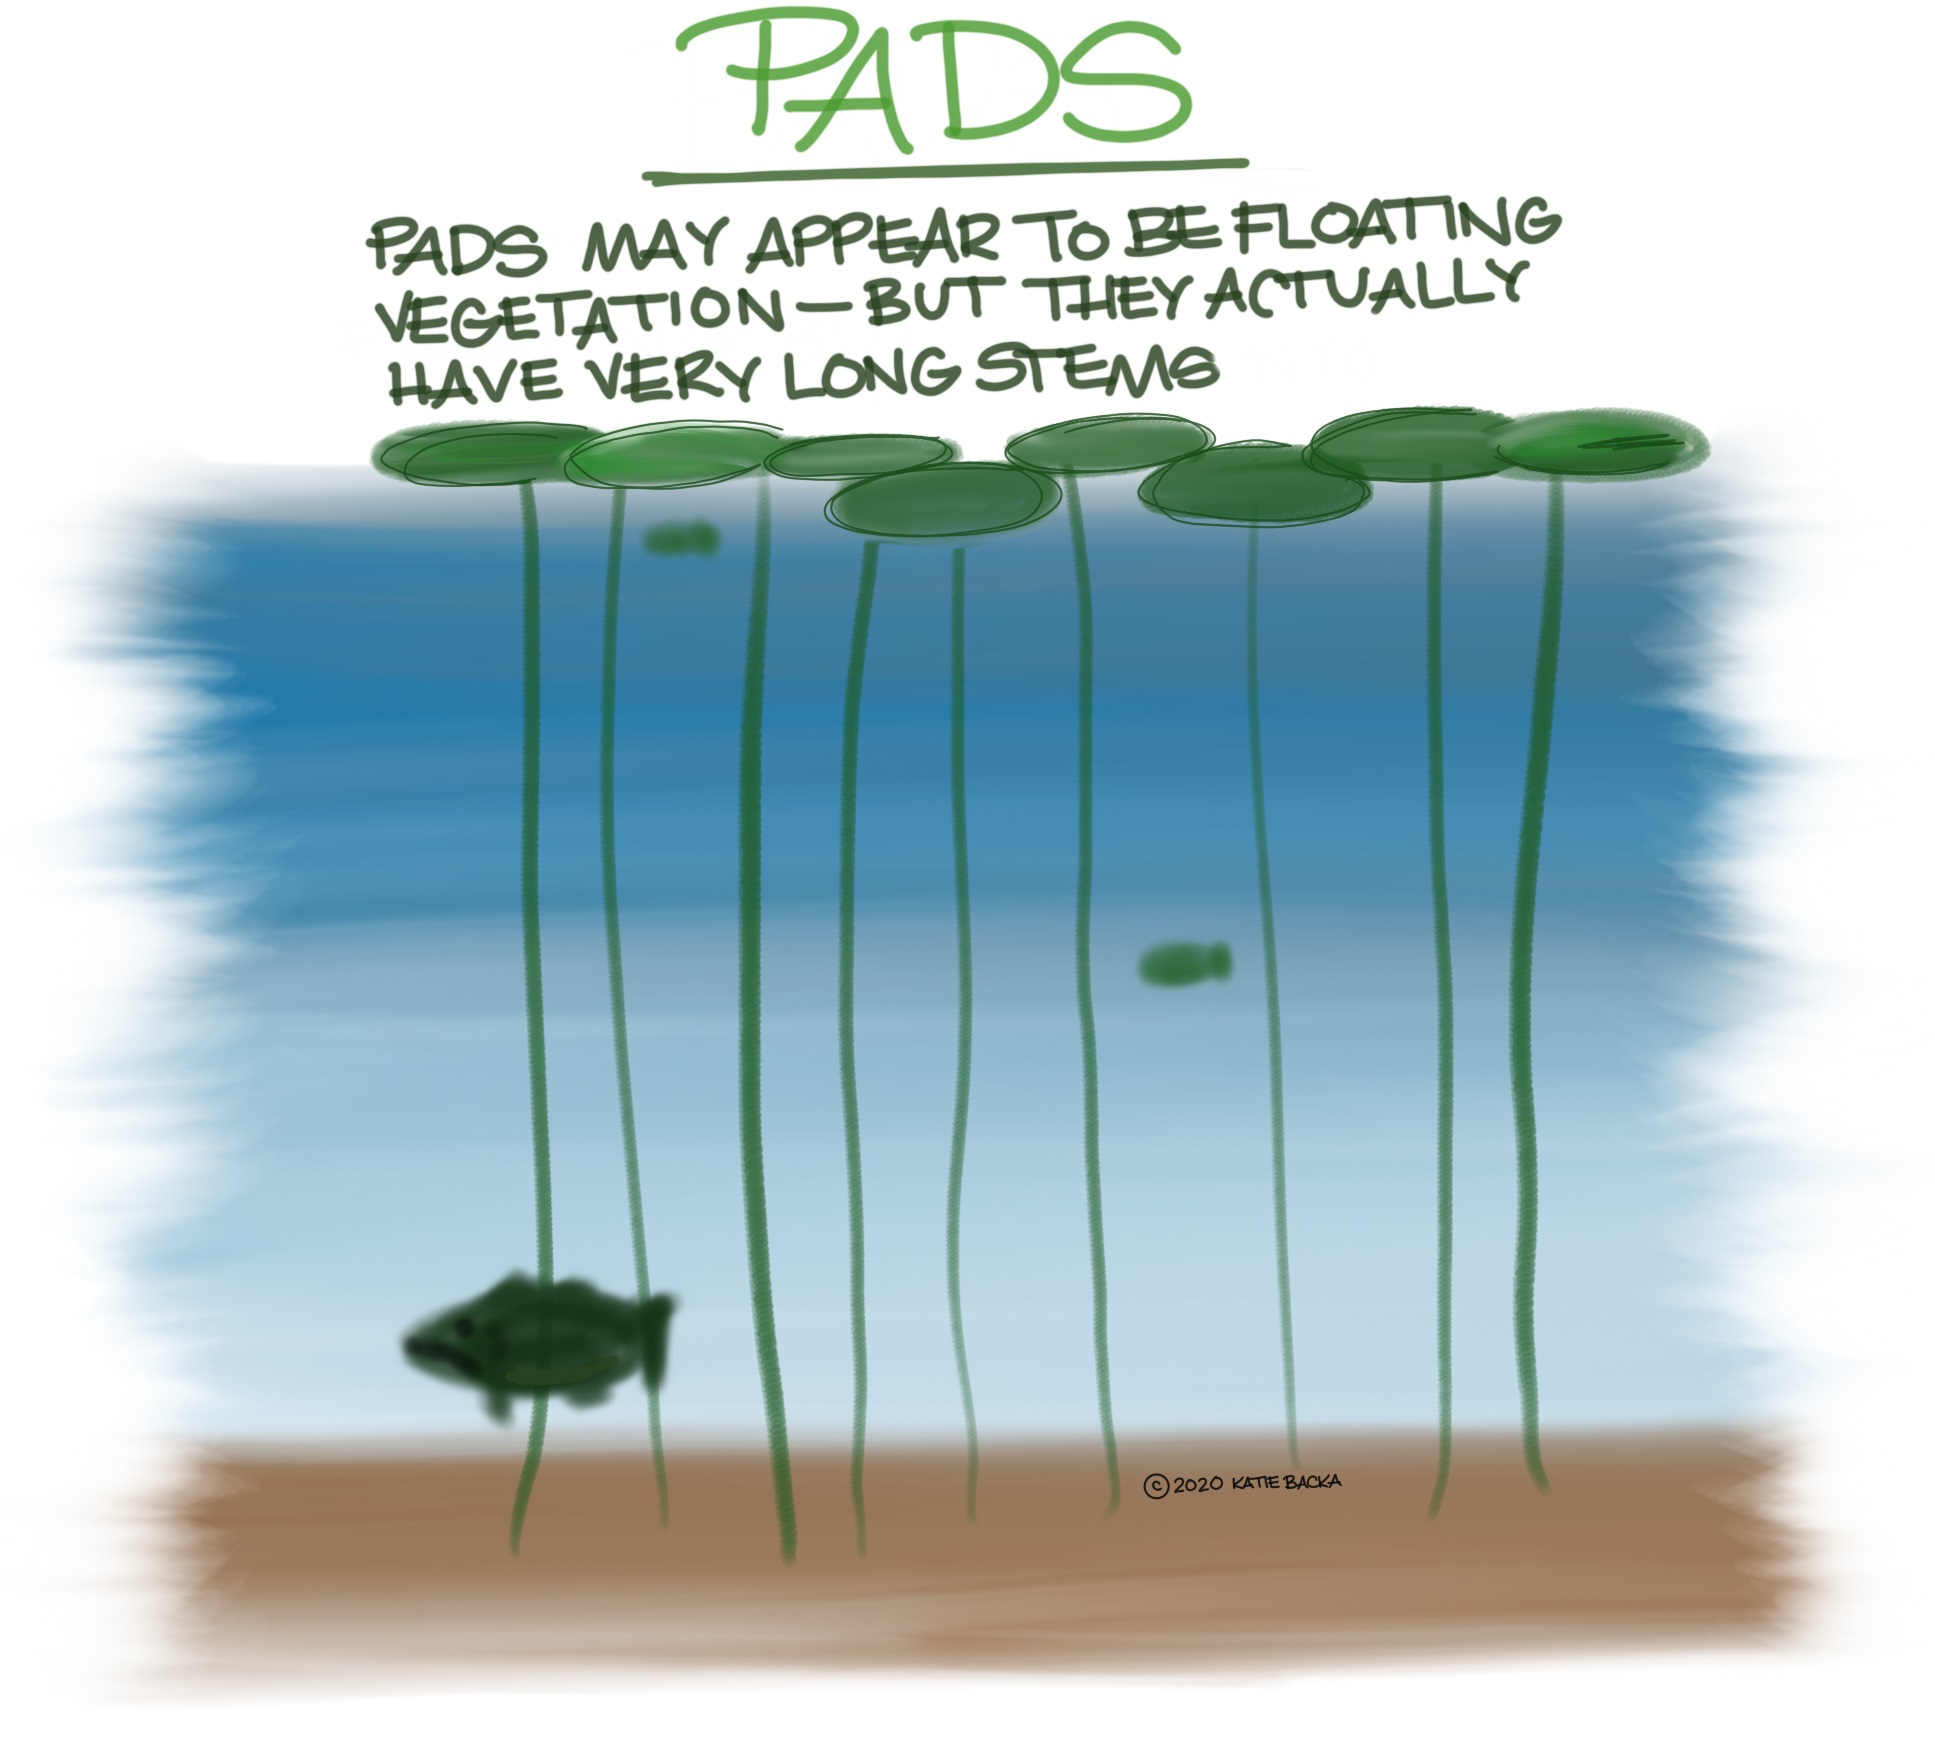 Script: Pads - padys may appear to be floating vegetation - but they actually have very long stems